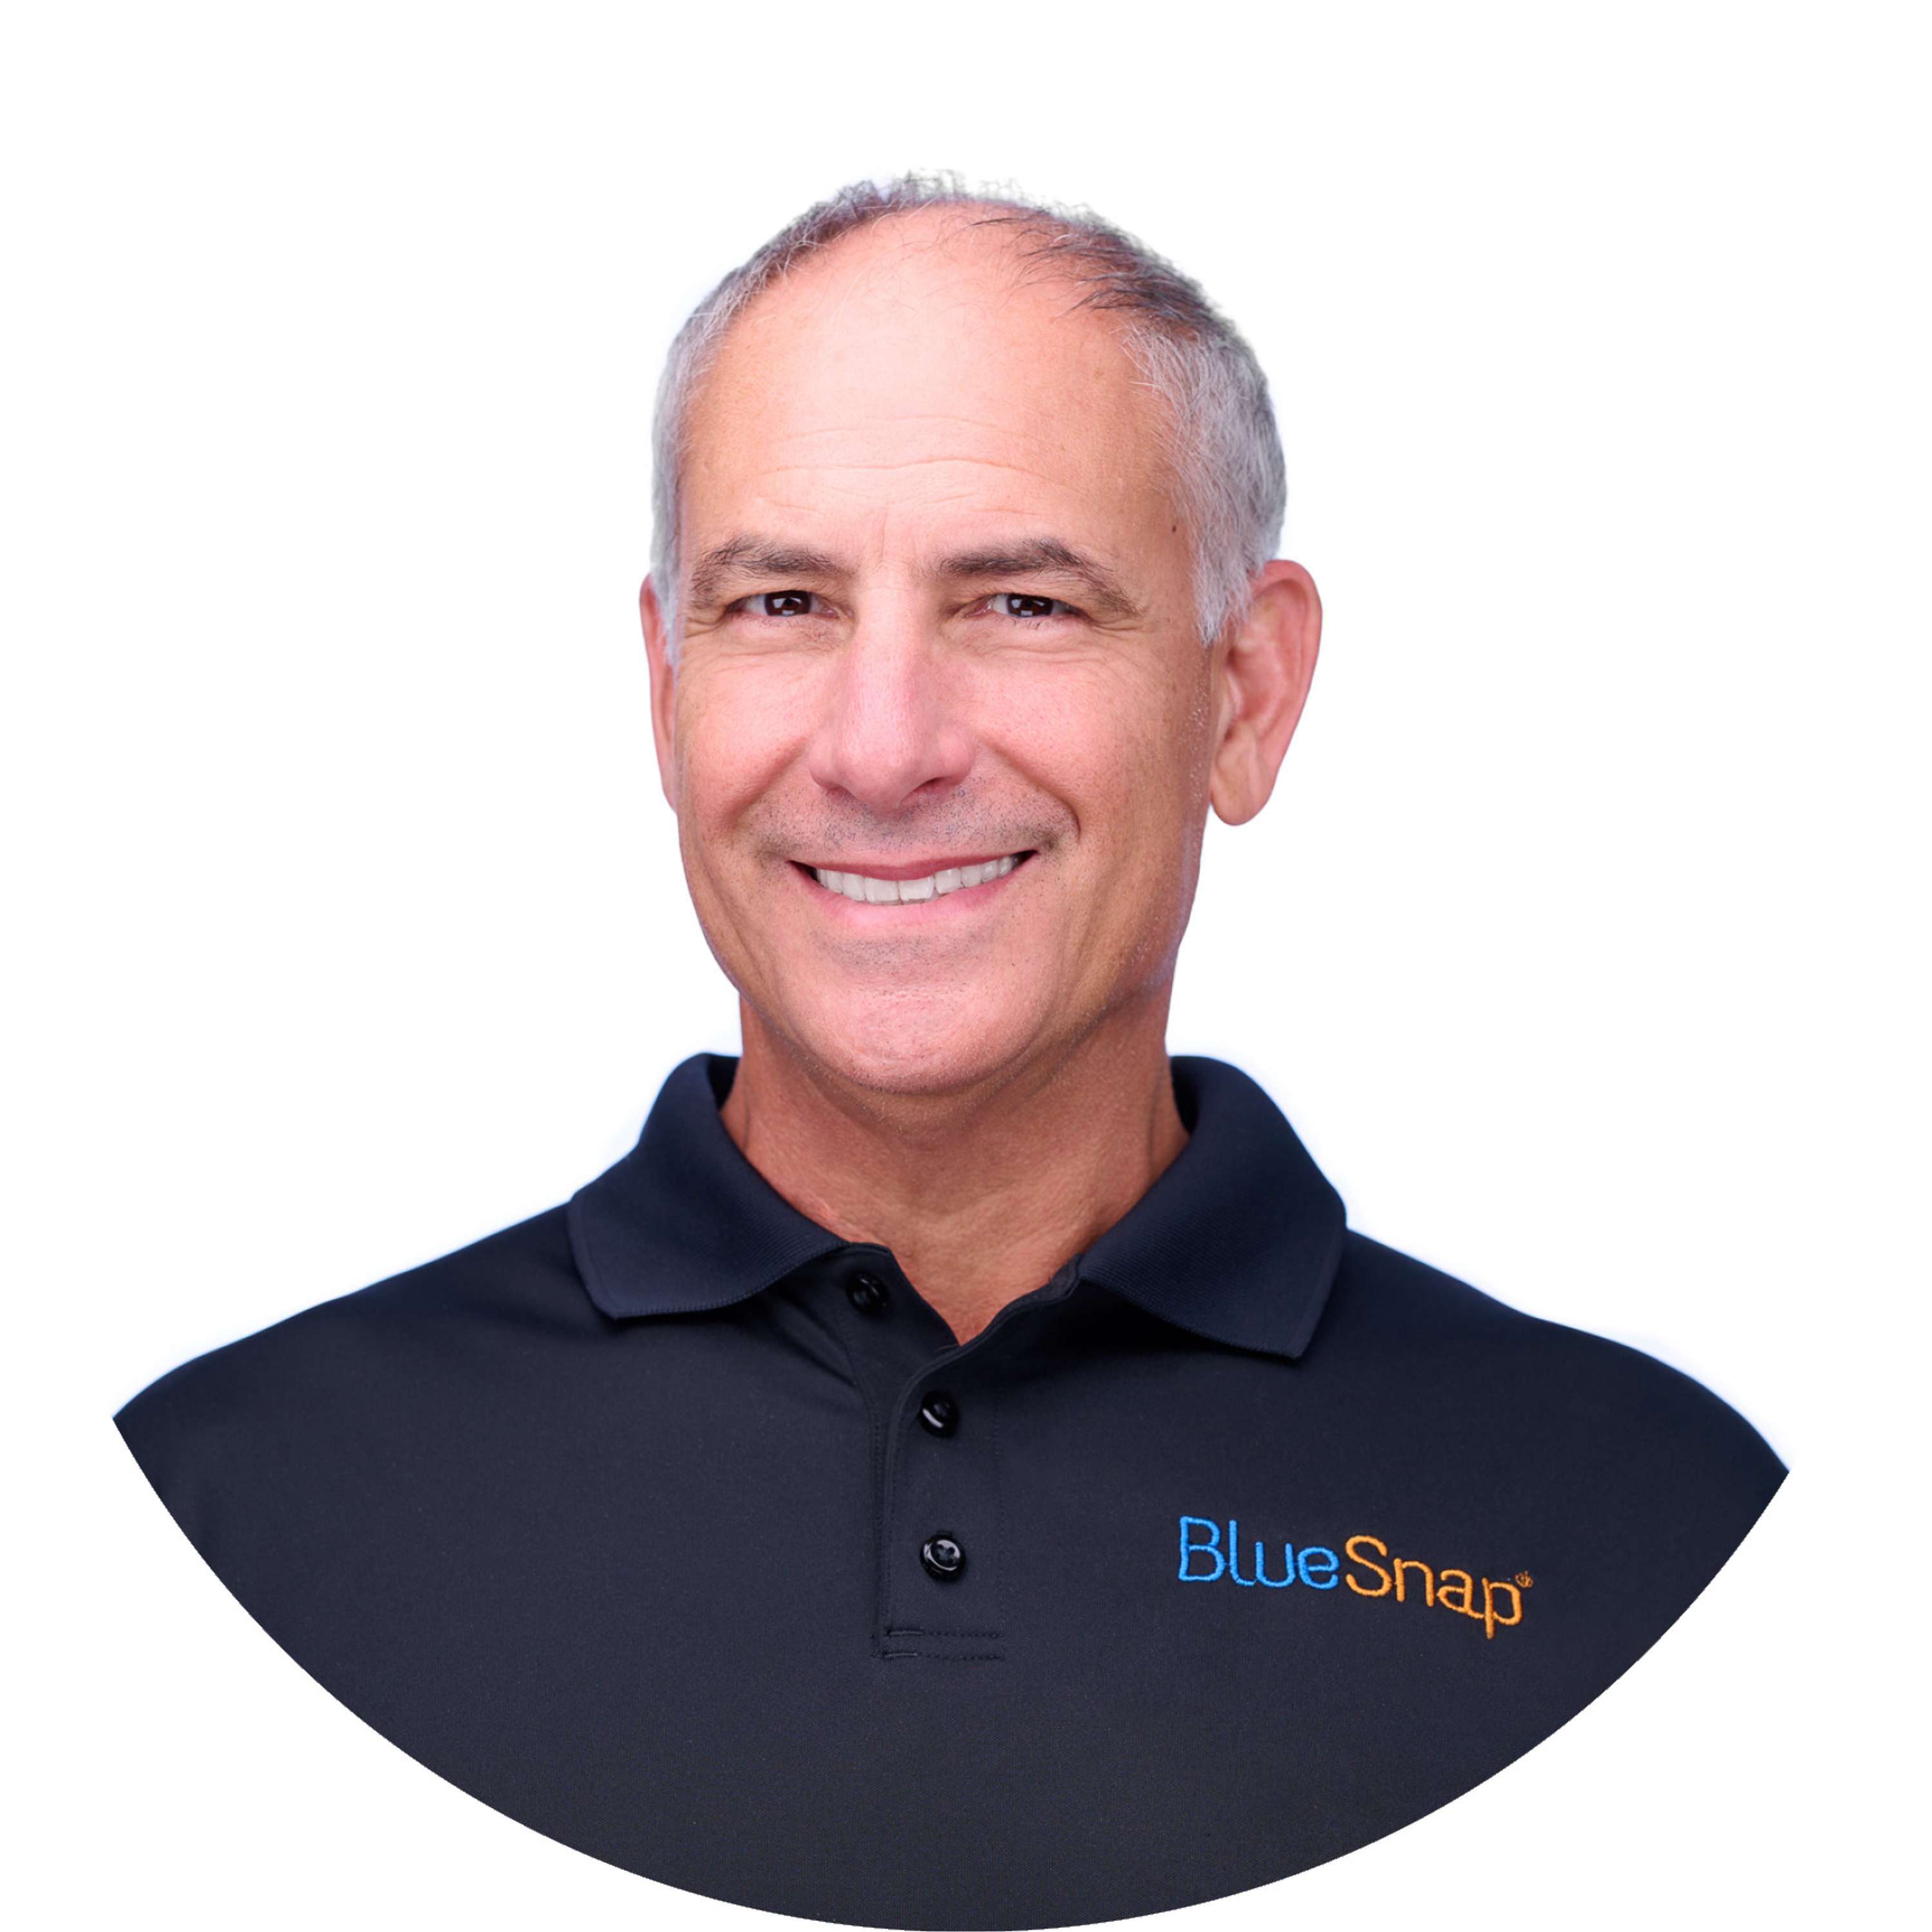 Orchestrating payments for any business with Ralph Dangelmaier, CEO and Board member at BlueSnap (USA)